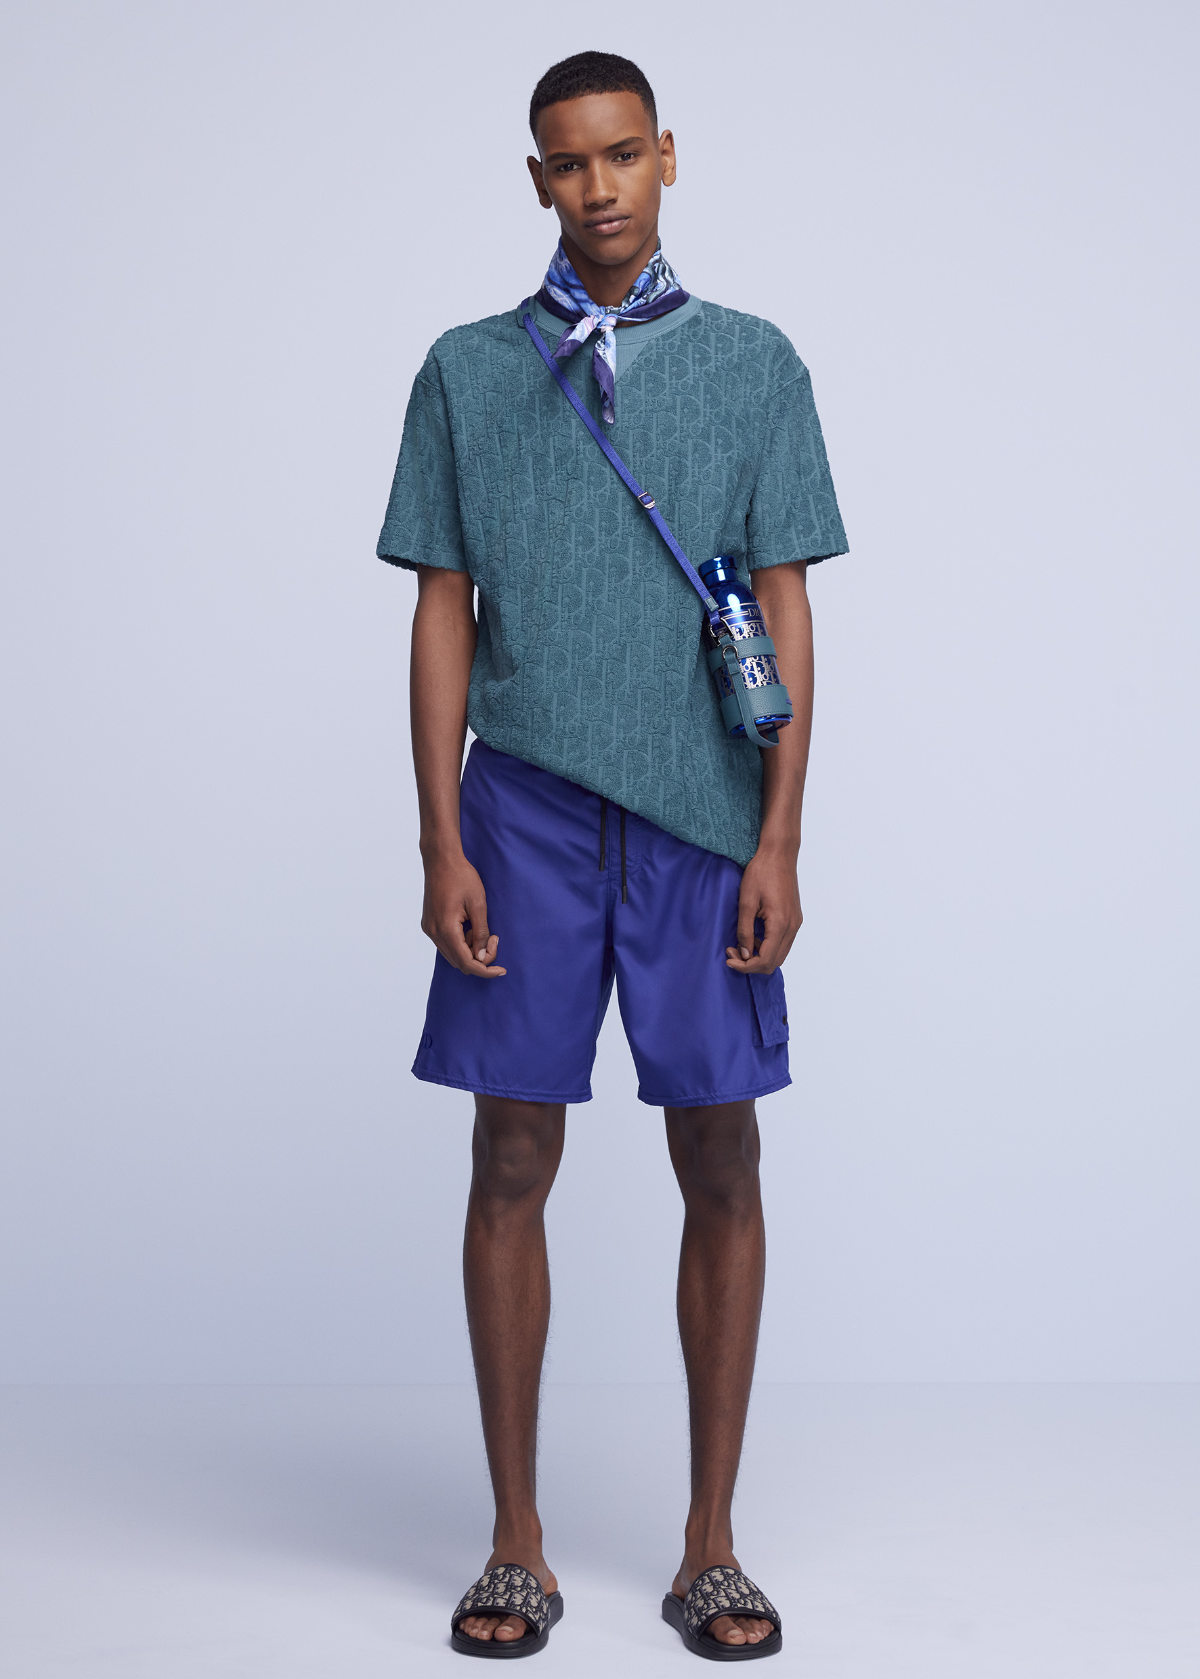 DIOR Introduces Its New Men Ready-To-Wear Beachwear 2021 Collection